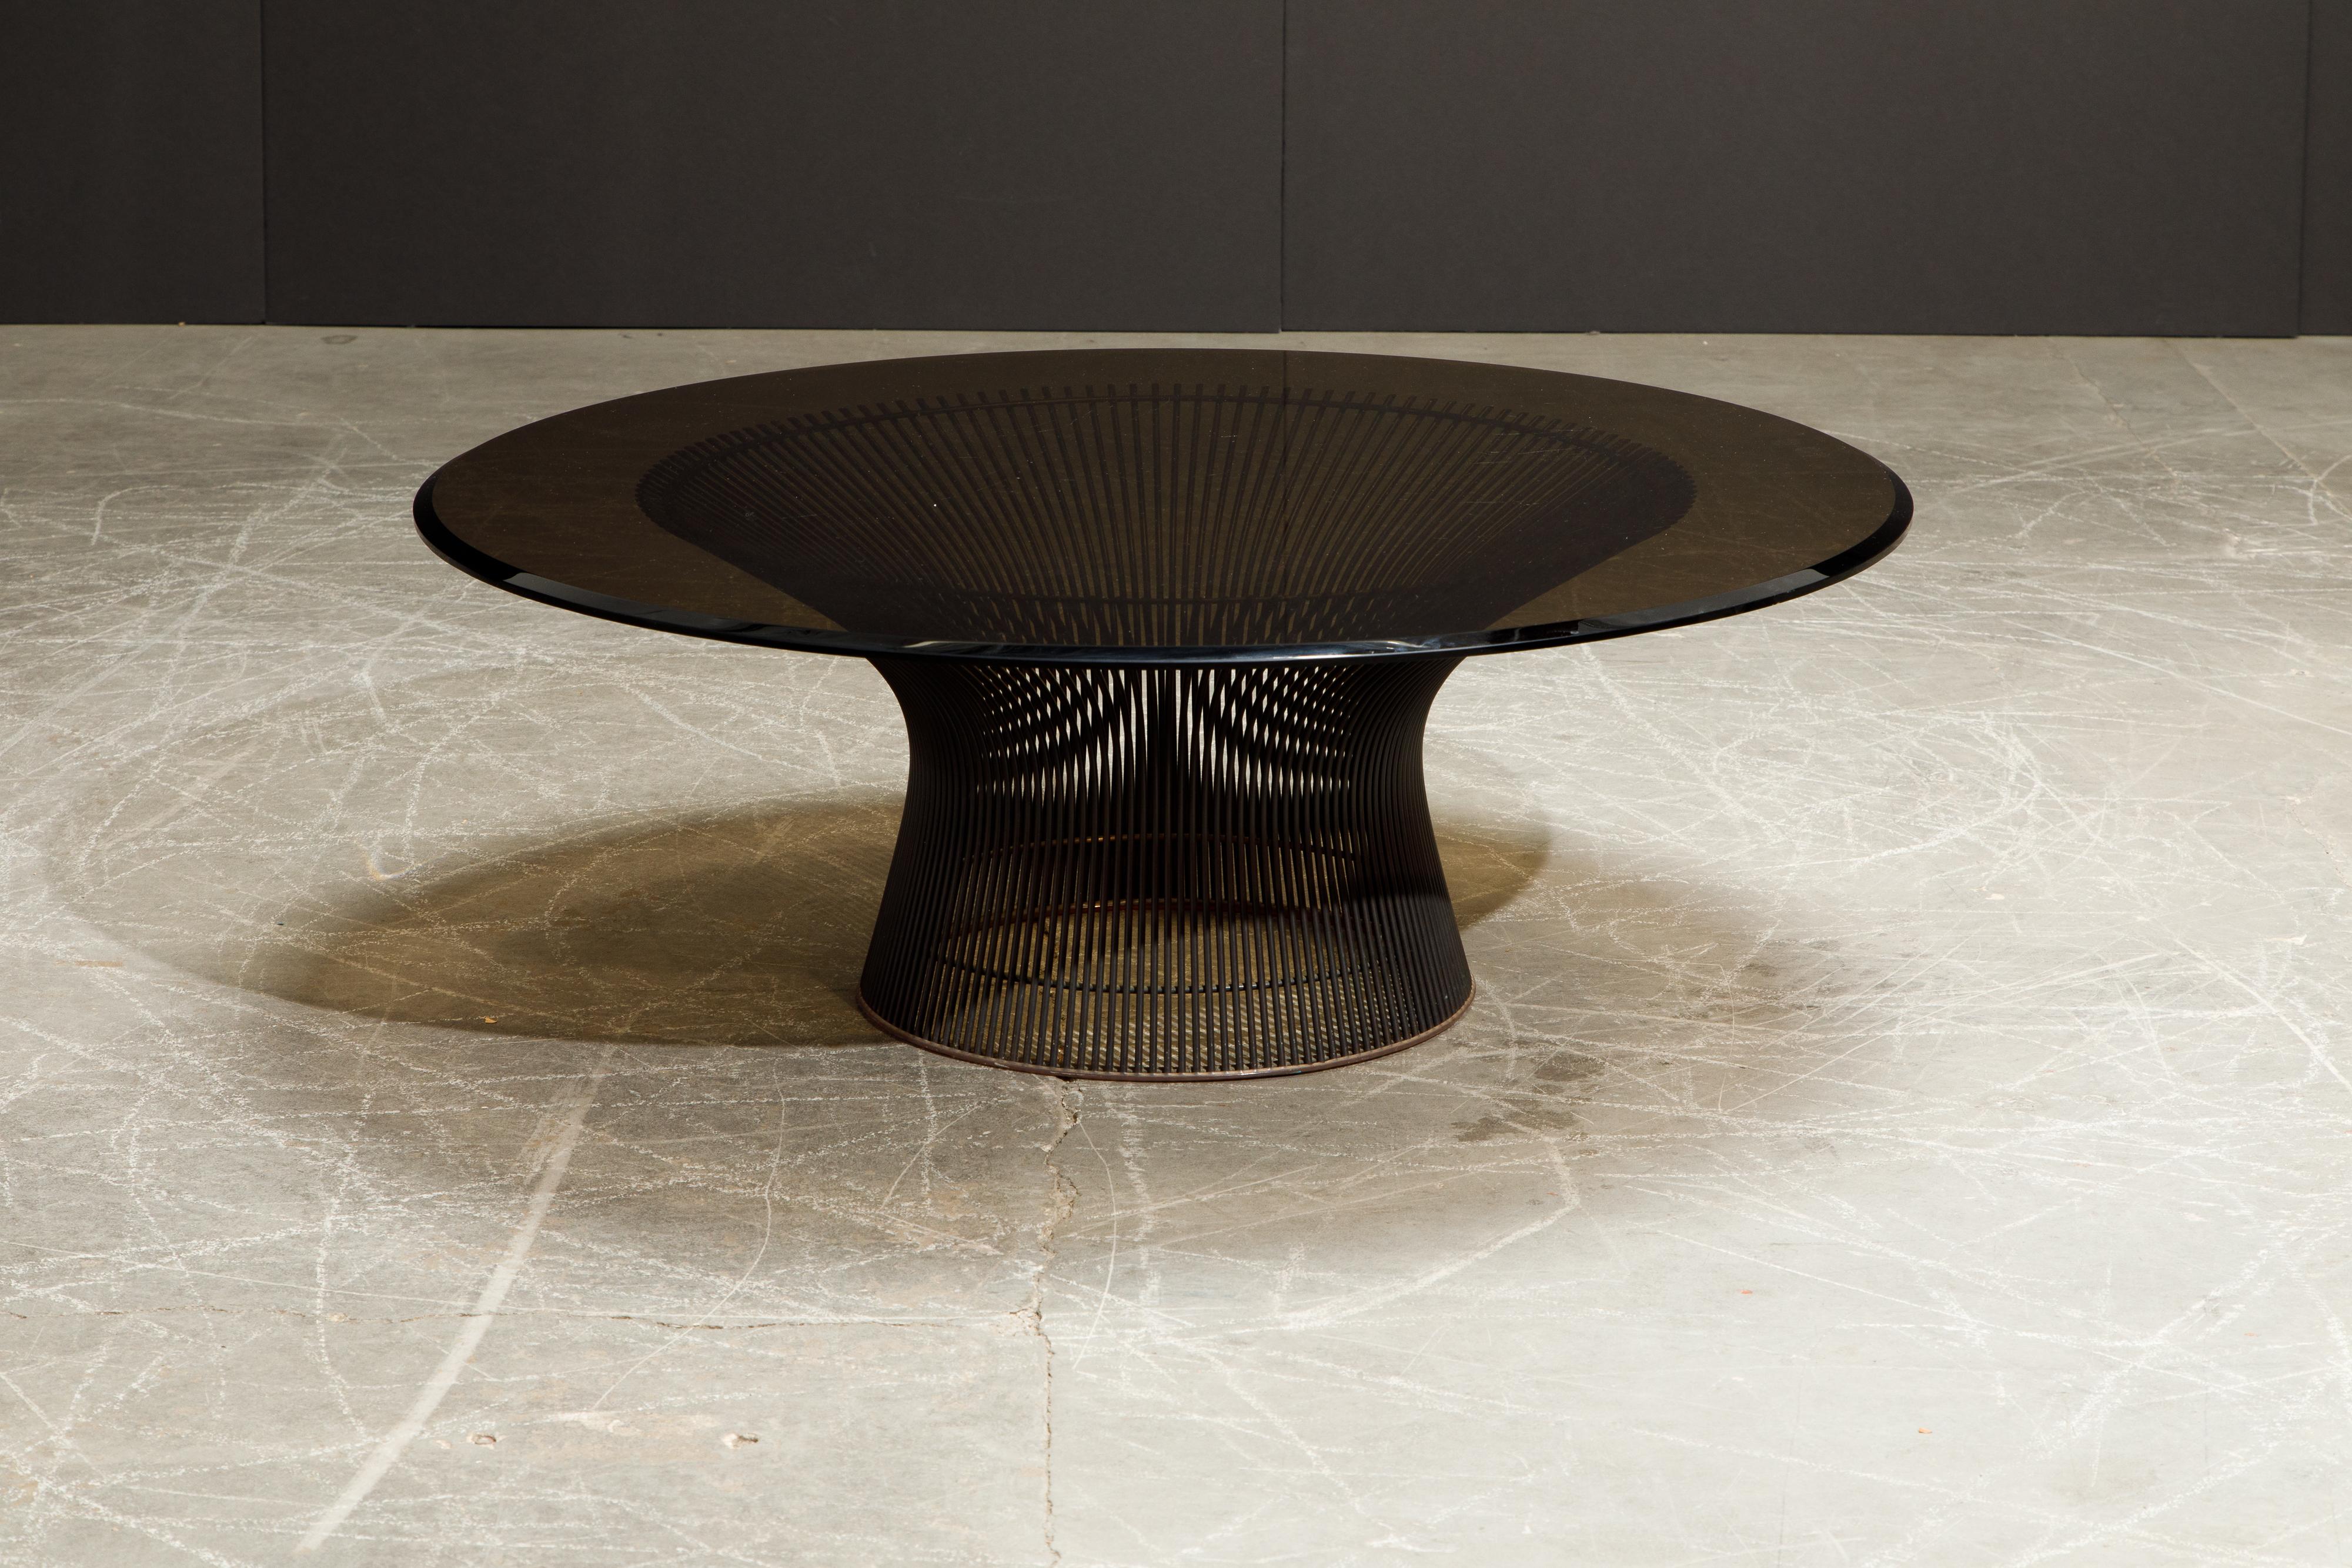 This early production example in bronze Warren Platner for Knoll International cocktail table, designed in 1966, was produced in the mid / late 1960s to early 1970s and is of the original production years when Knoll used real bronze. Later